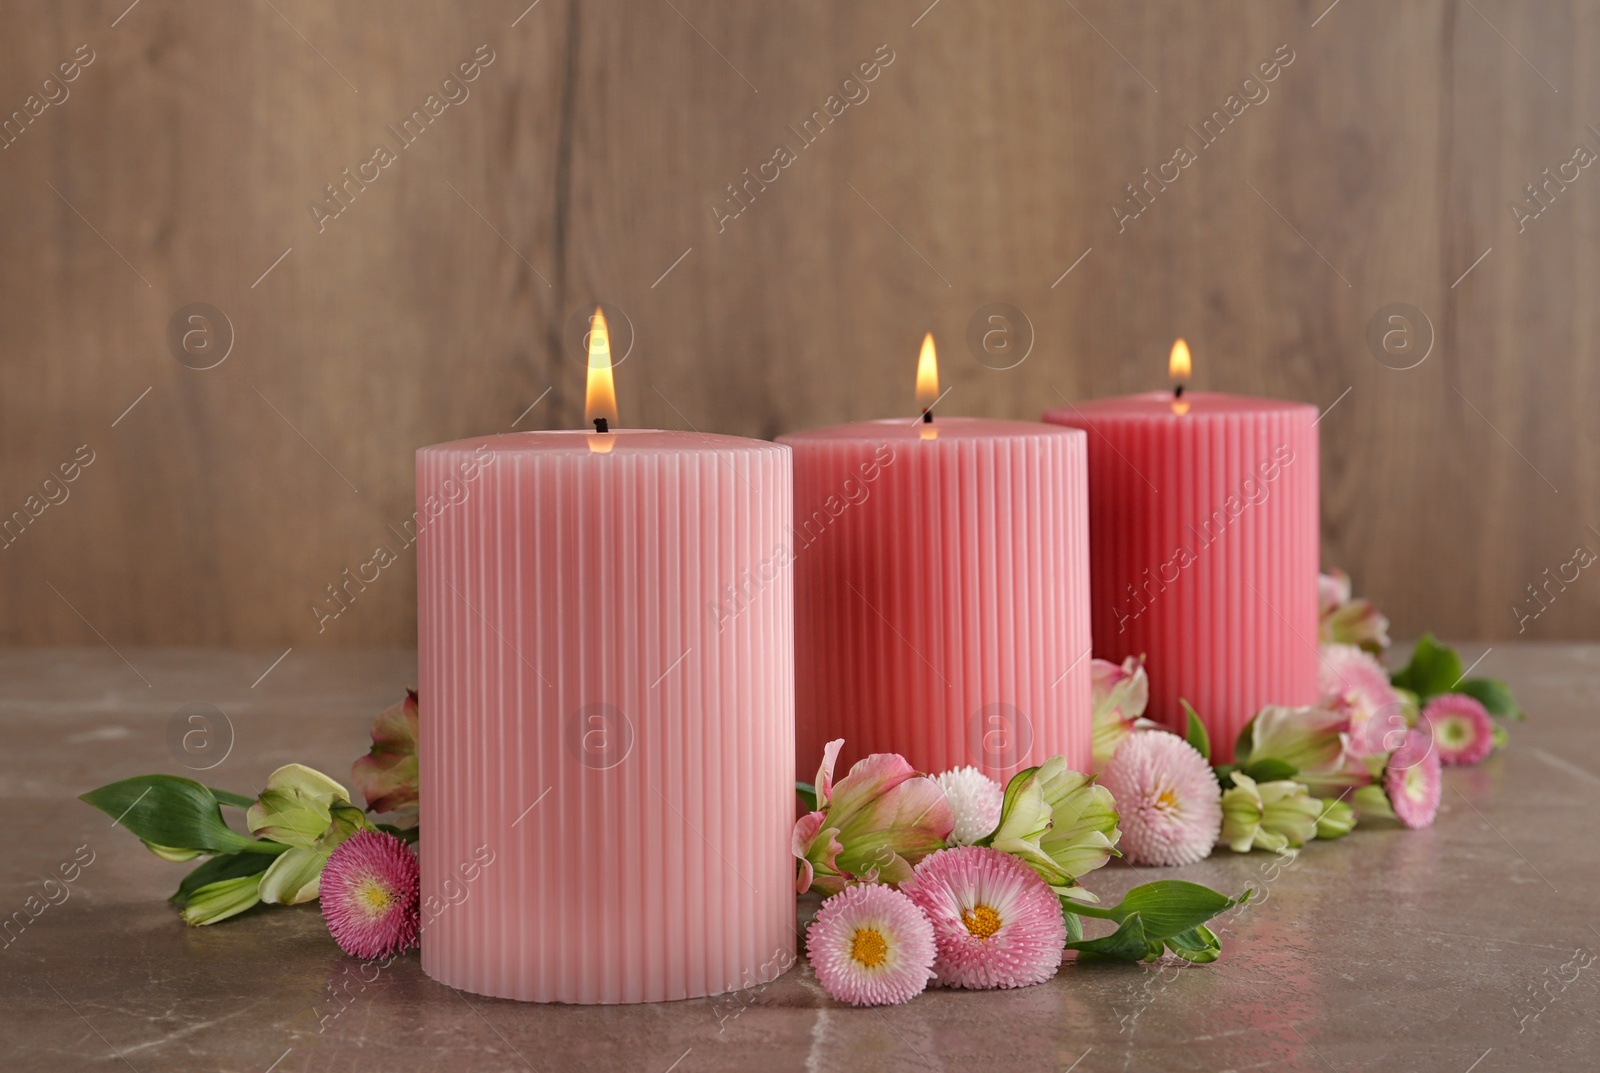 Photo of Stylish tender composition with burning candles and flowers on table against wooden background. Cozy interior element